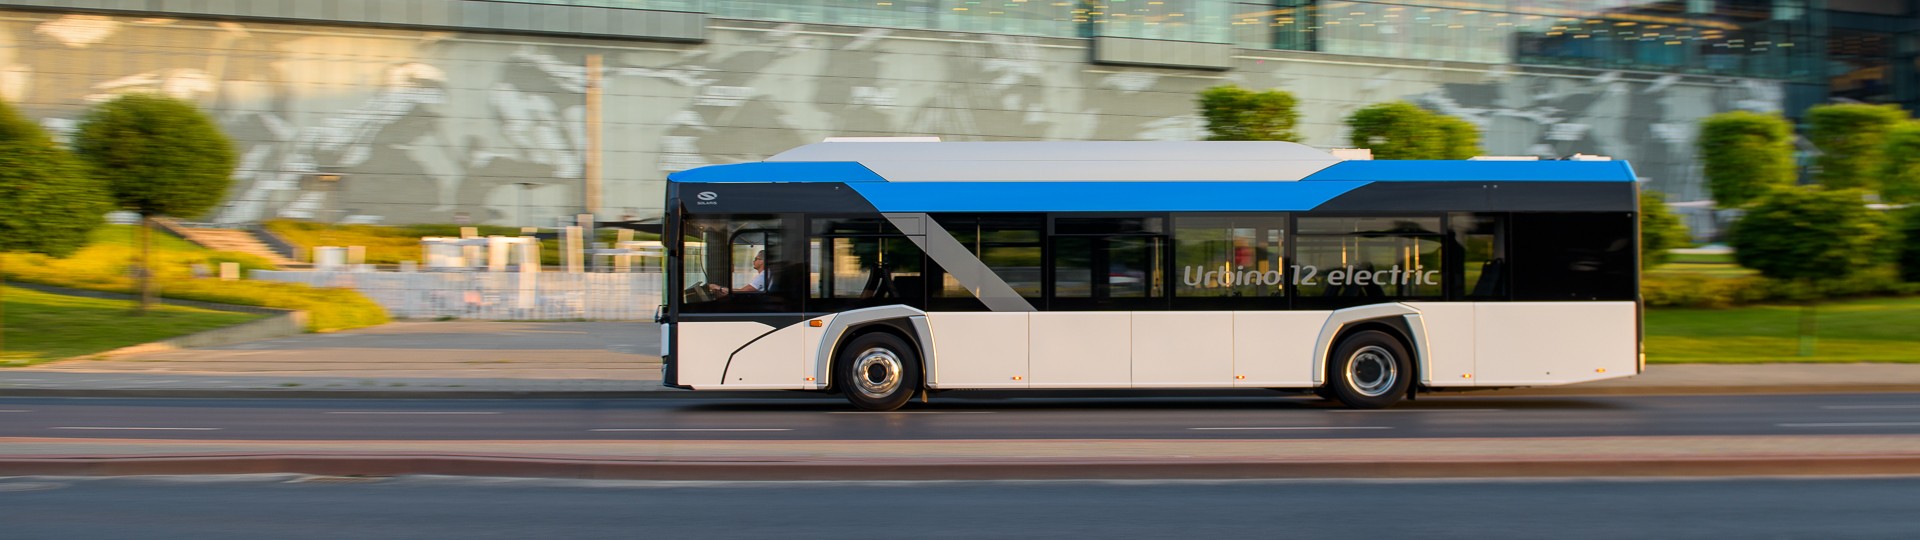 Another Spanish city opts for Solaris e-buses: Urbino 12 electric vehicles heading to Fuenlabrada